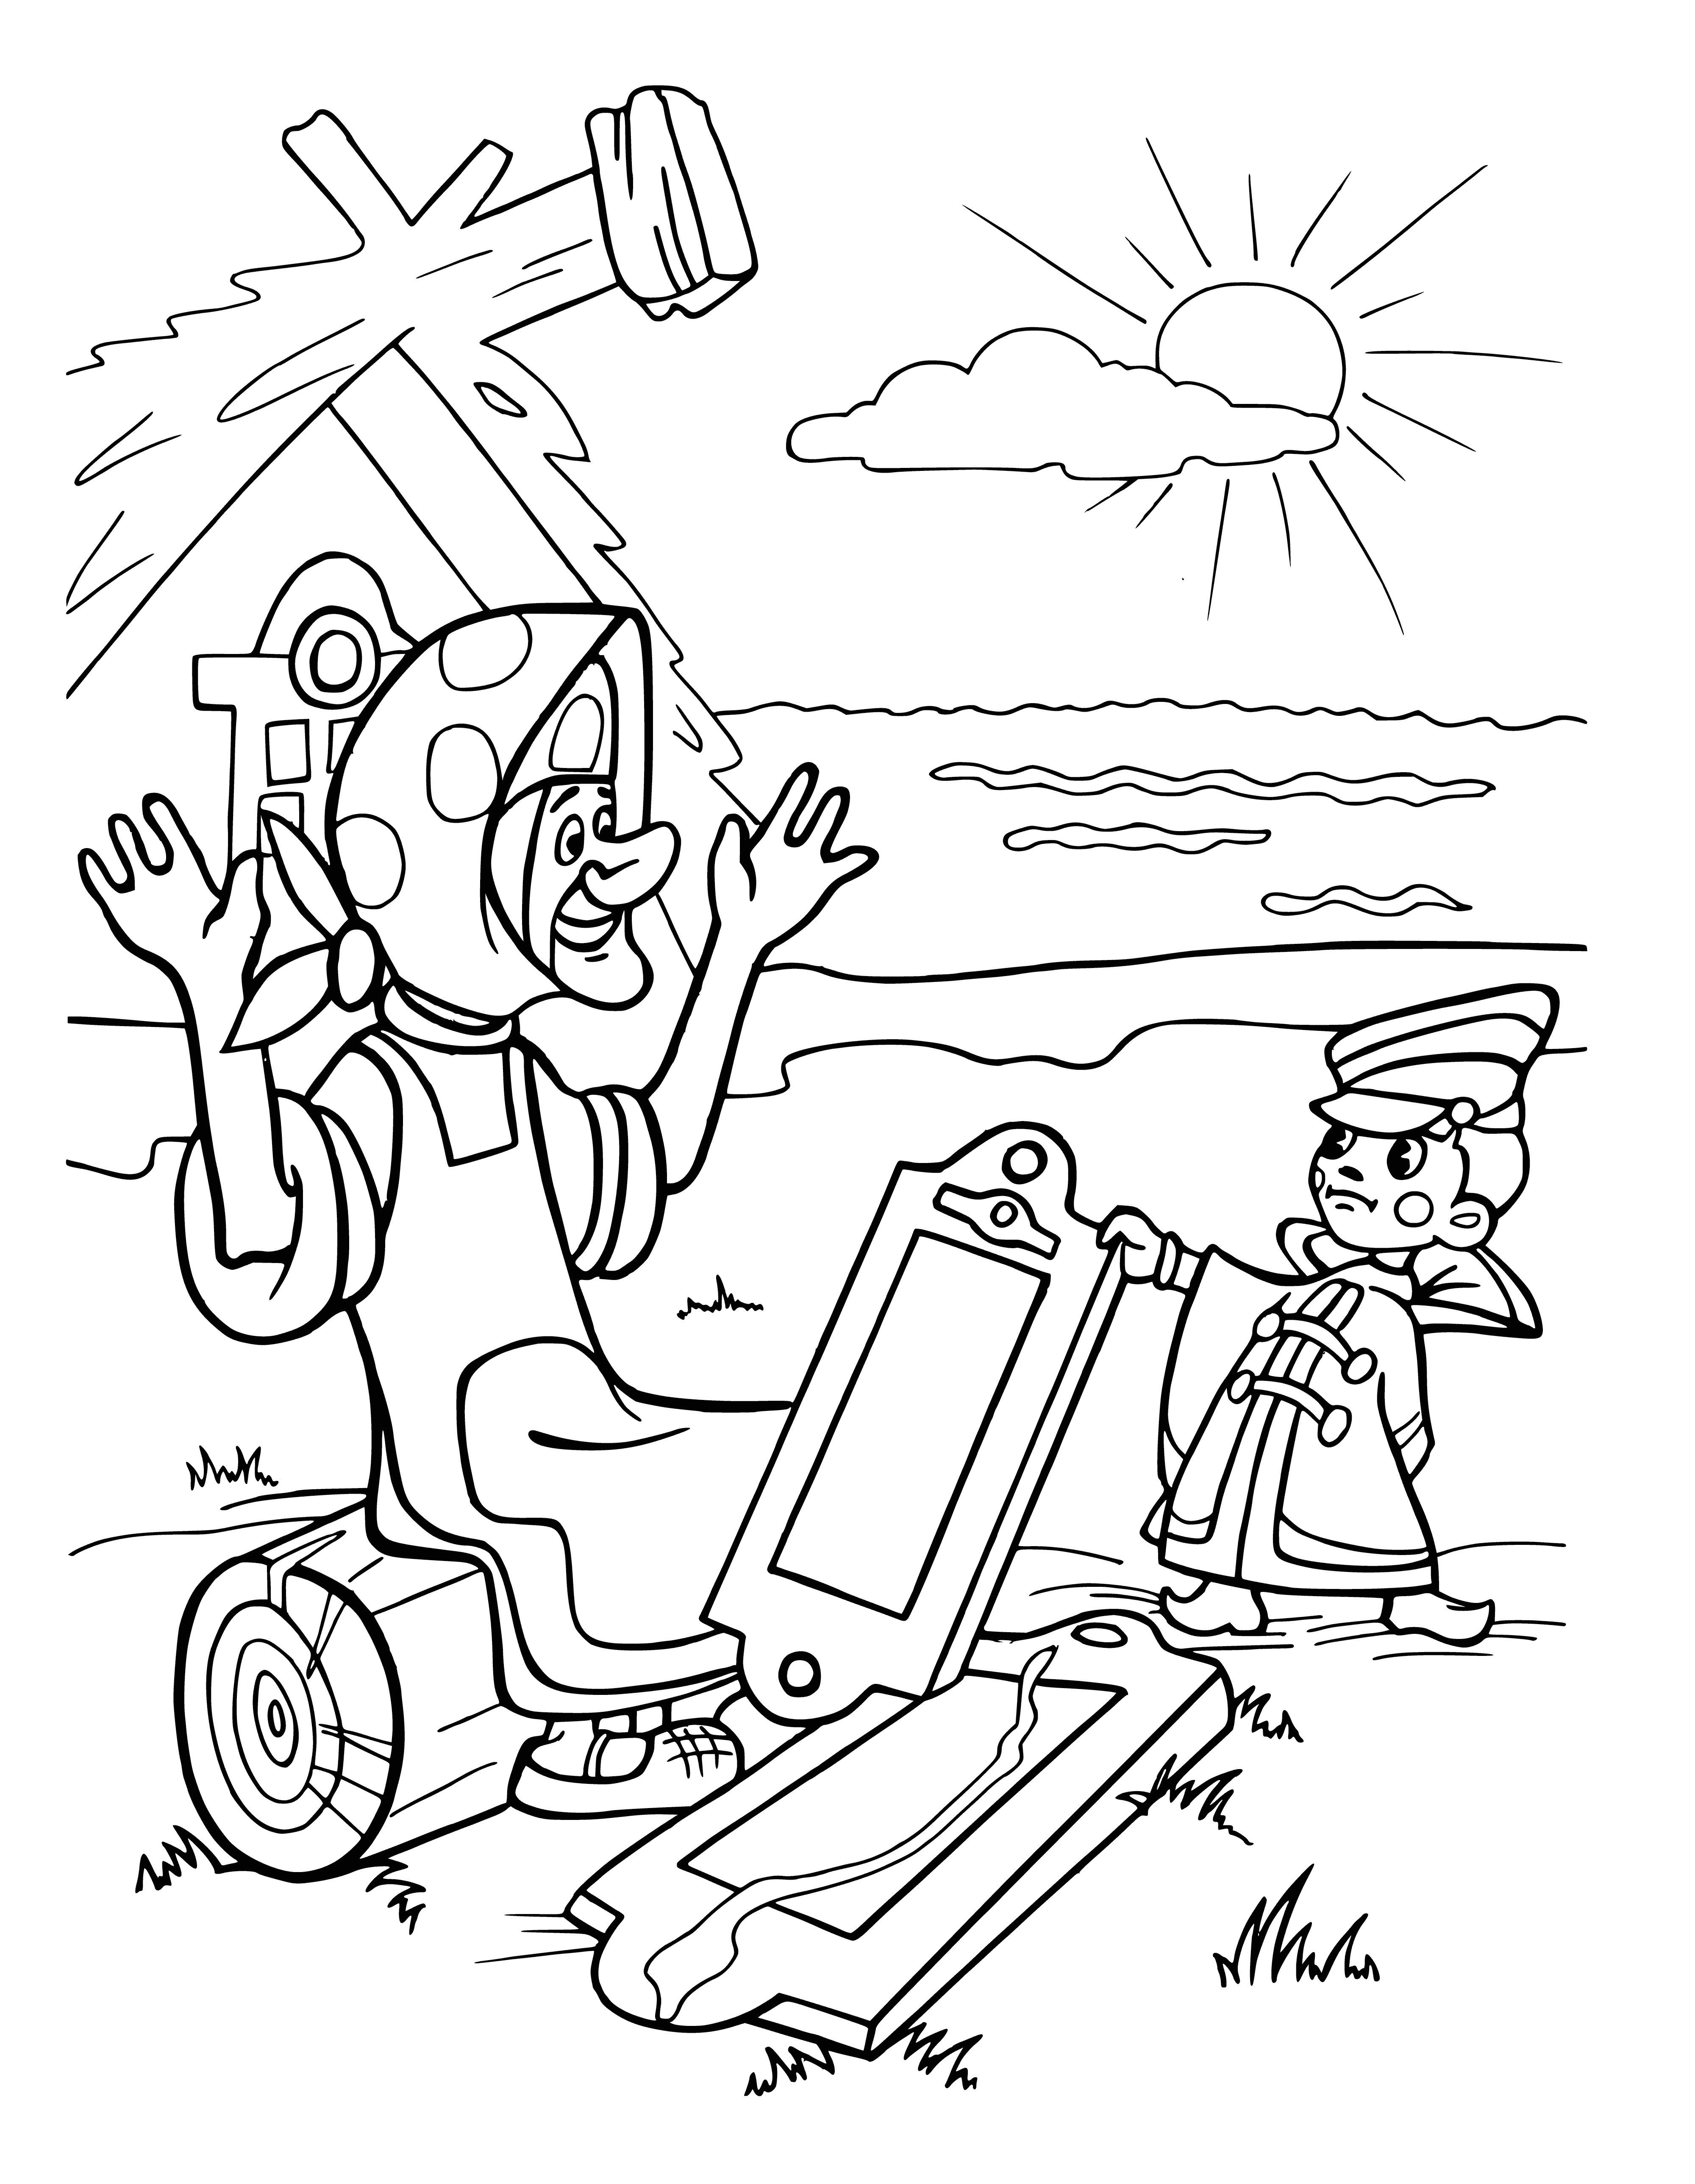 coloring page: A small white creature with black eyes, a long tail, quickly crossing the kingdom: a Vovka in the distance, beyond the New Trough.